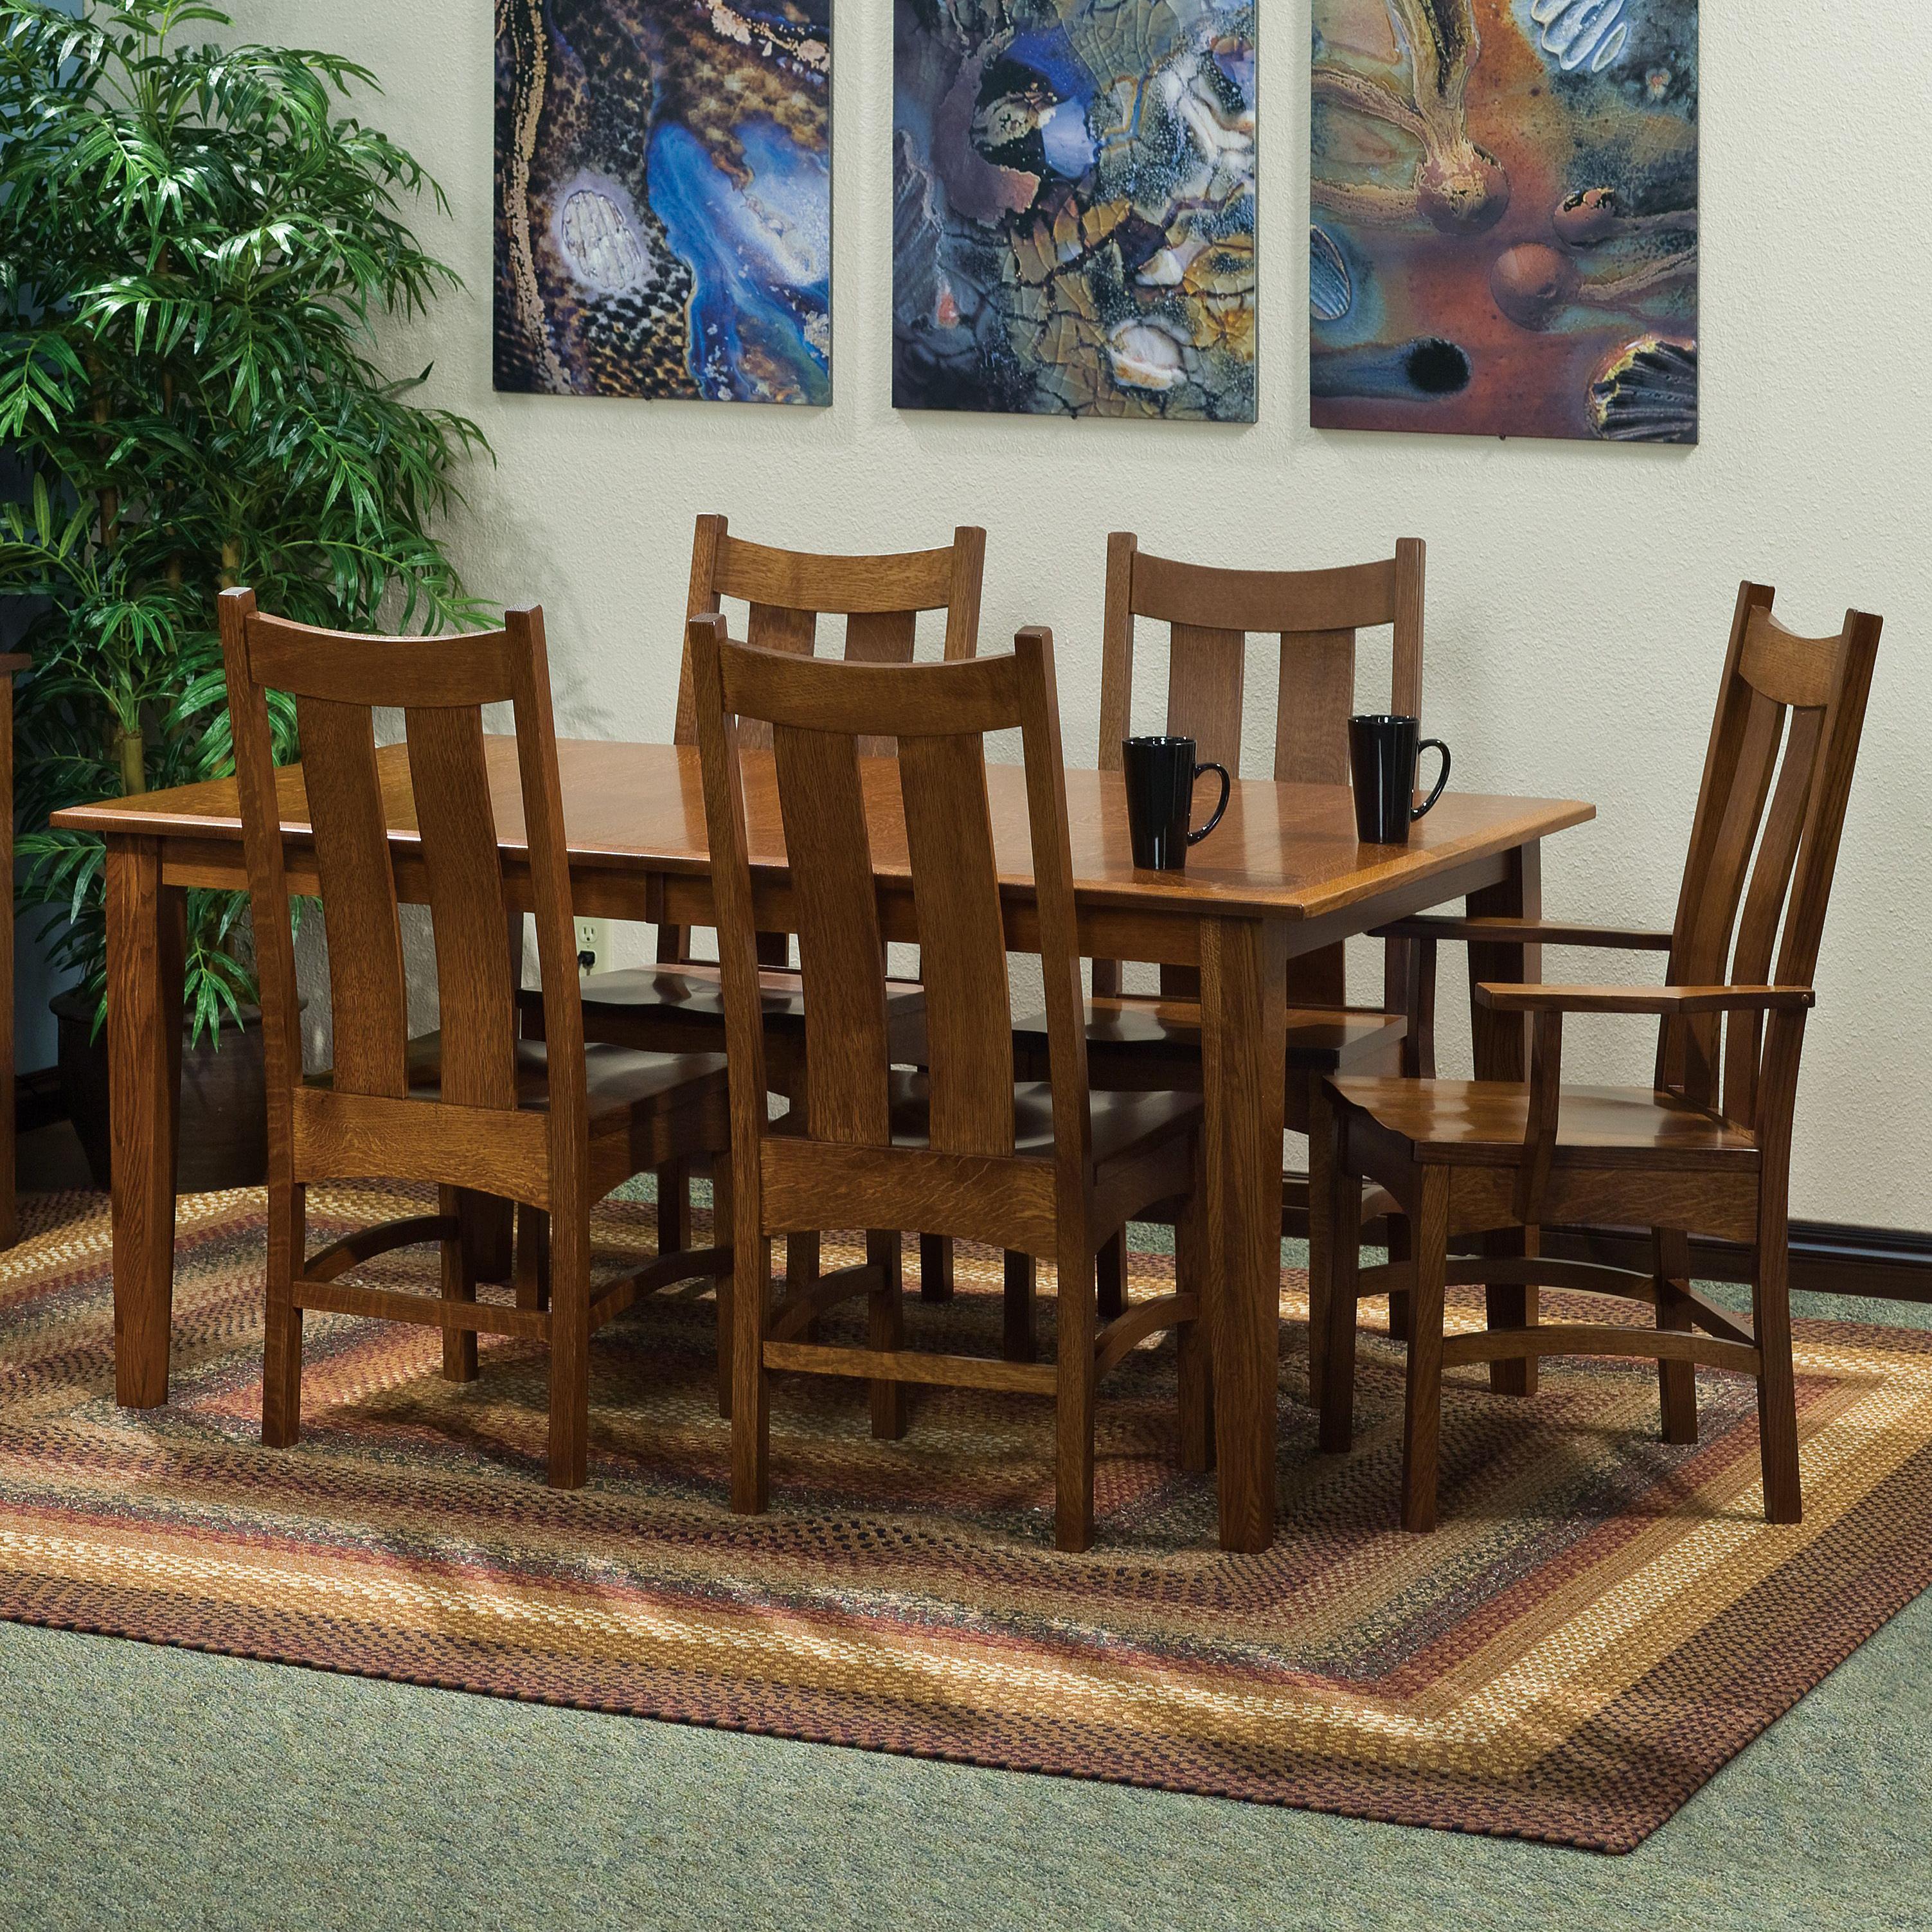 7 pc. 48x66" Rectangular Leg Dining Table and Chairs Set